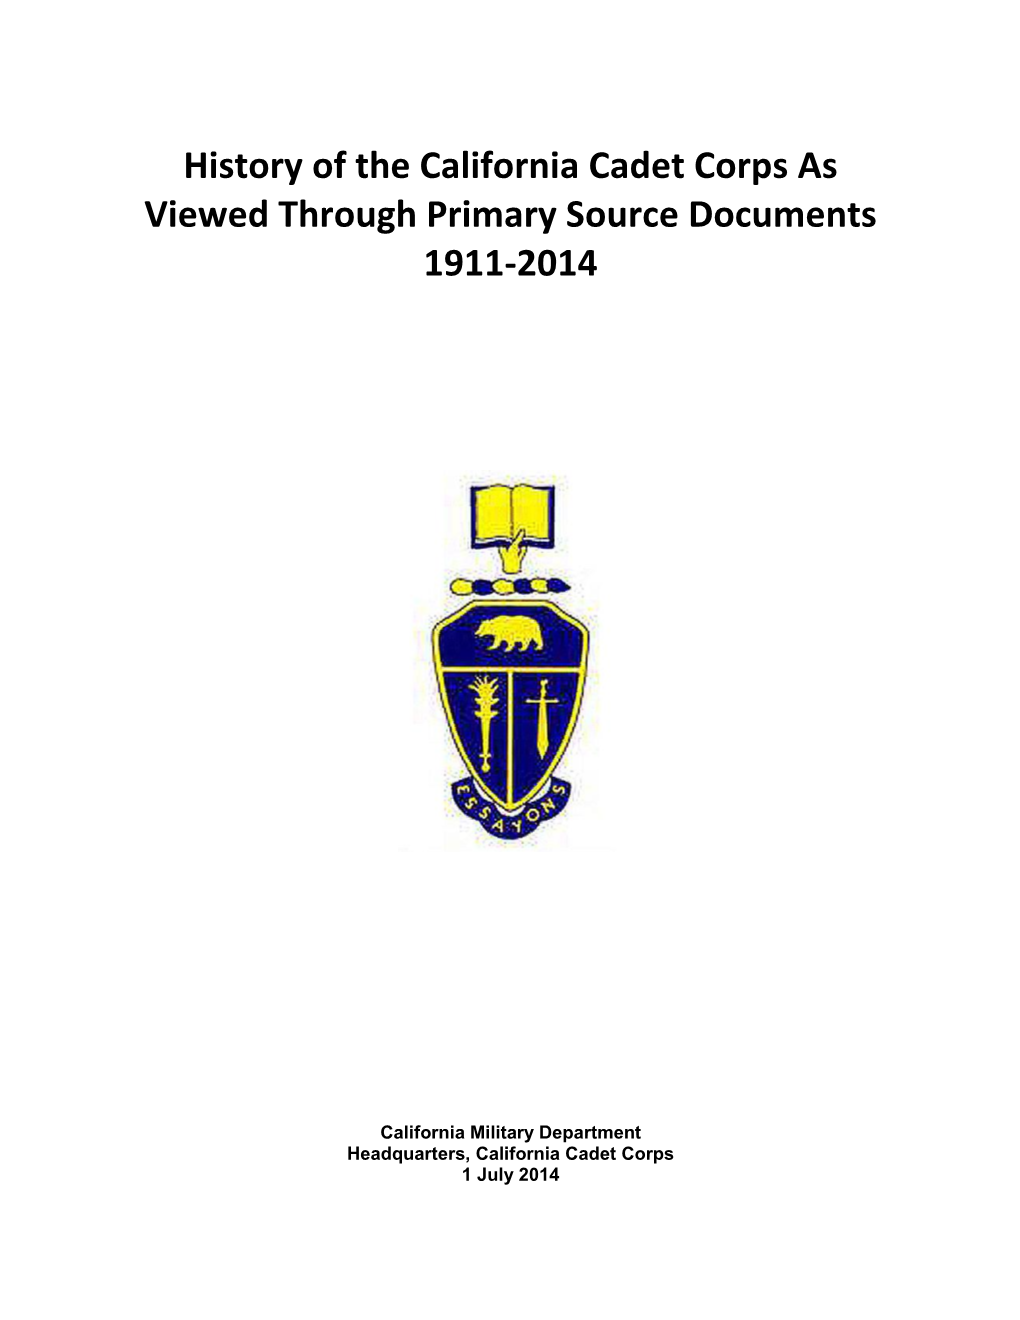 History of the California Cadet Corps As Viewed Through Primary Source Documents 1911-2014